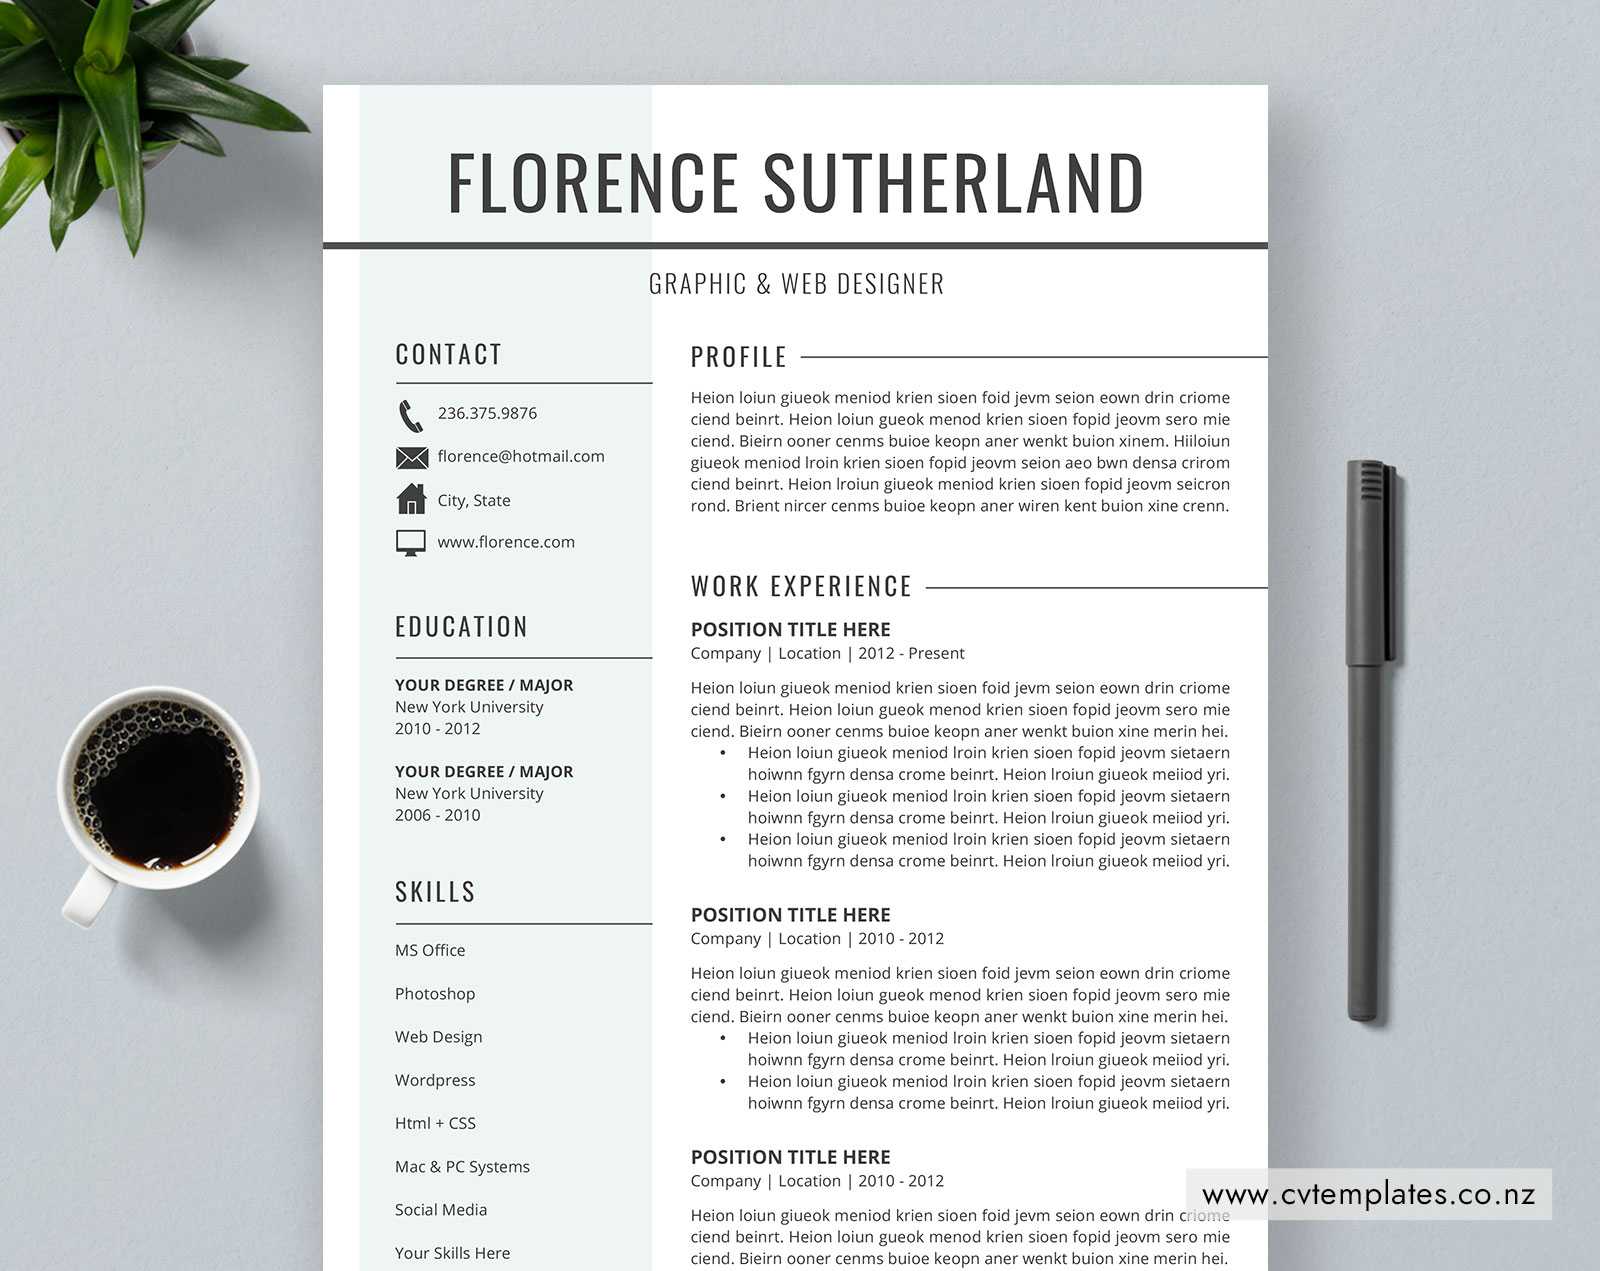 Cv Template For Ms Word, Curriculum Vitae, Professional Cv Template Design,  Editable Cv Template, Cover Letter, References, 1, 2 And 3 Page Resume Within How To Make A Cv Template On Microsoft Word